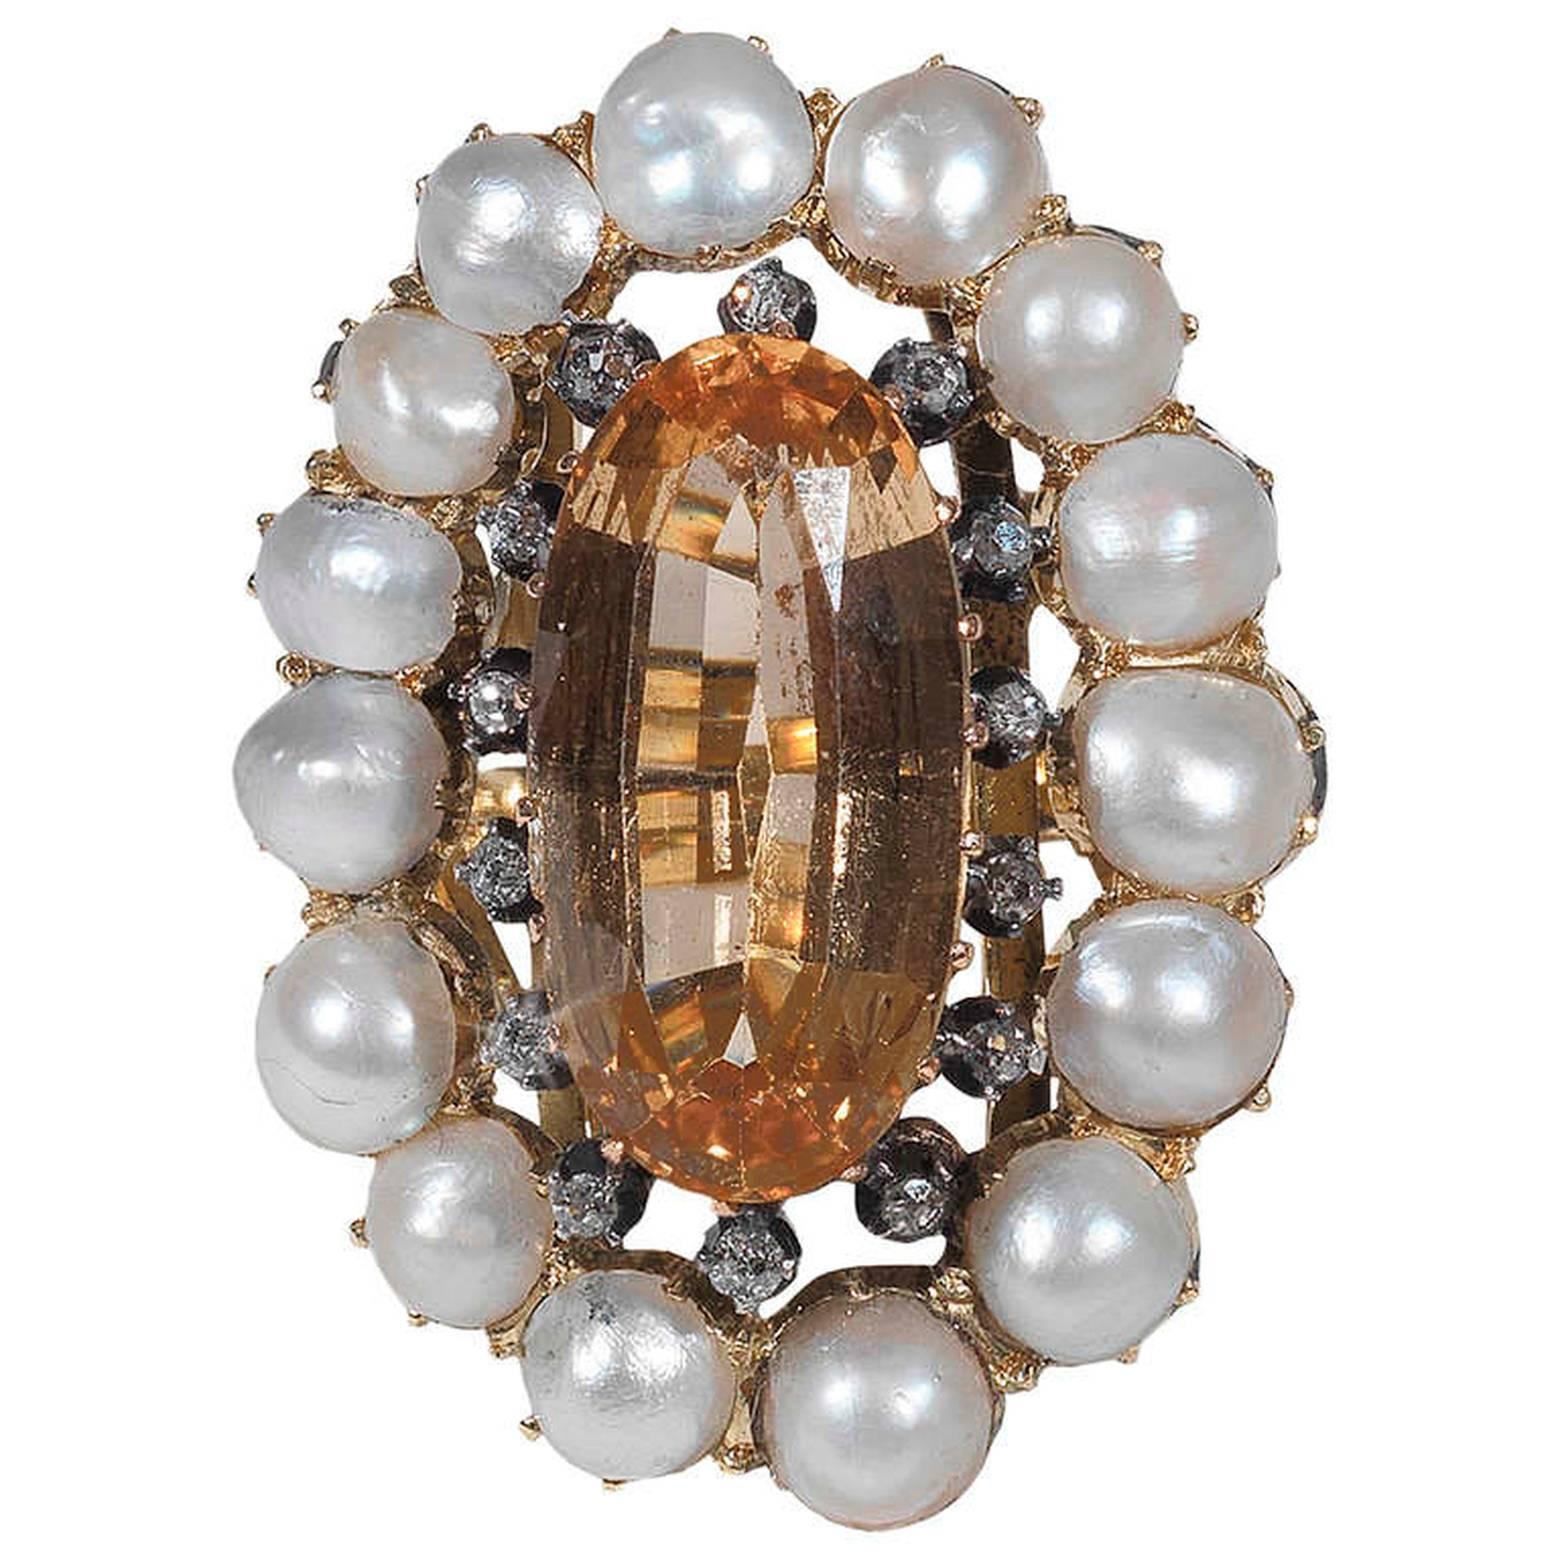 

The oval faceted topaz weighing approximately 9 carats cut down-set in between an half pearl cluster surround, mounted in yellow gold.

Circa 1800.

Weight 16.4 grams

Size 7